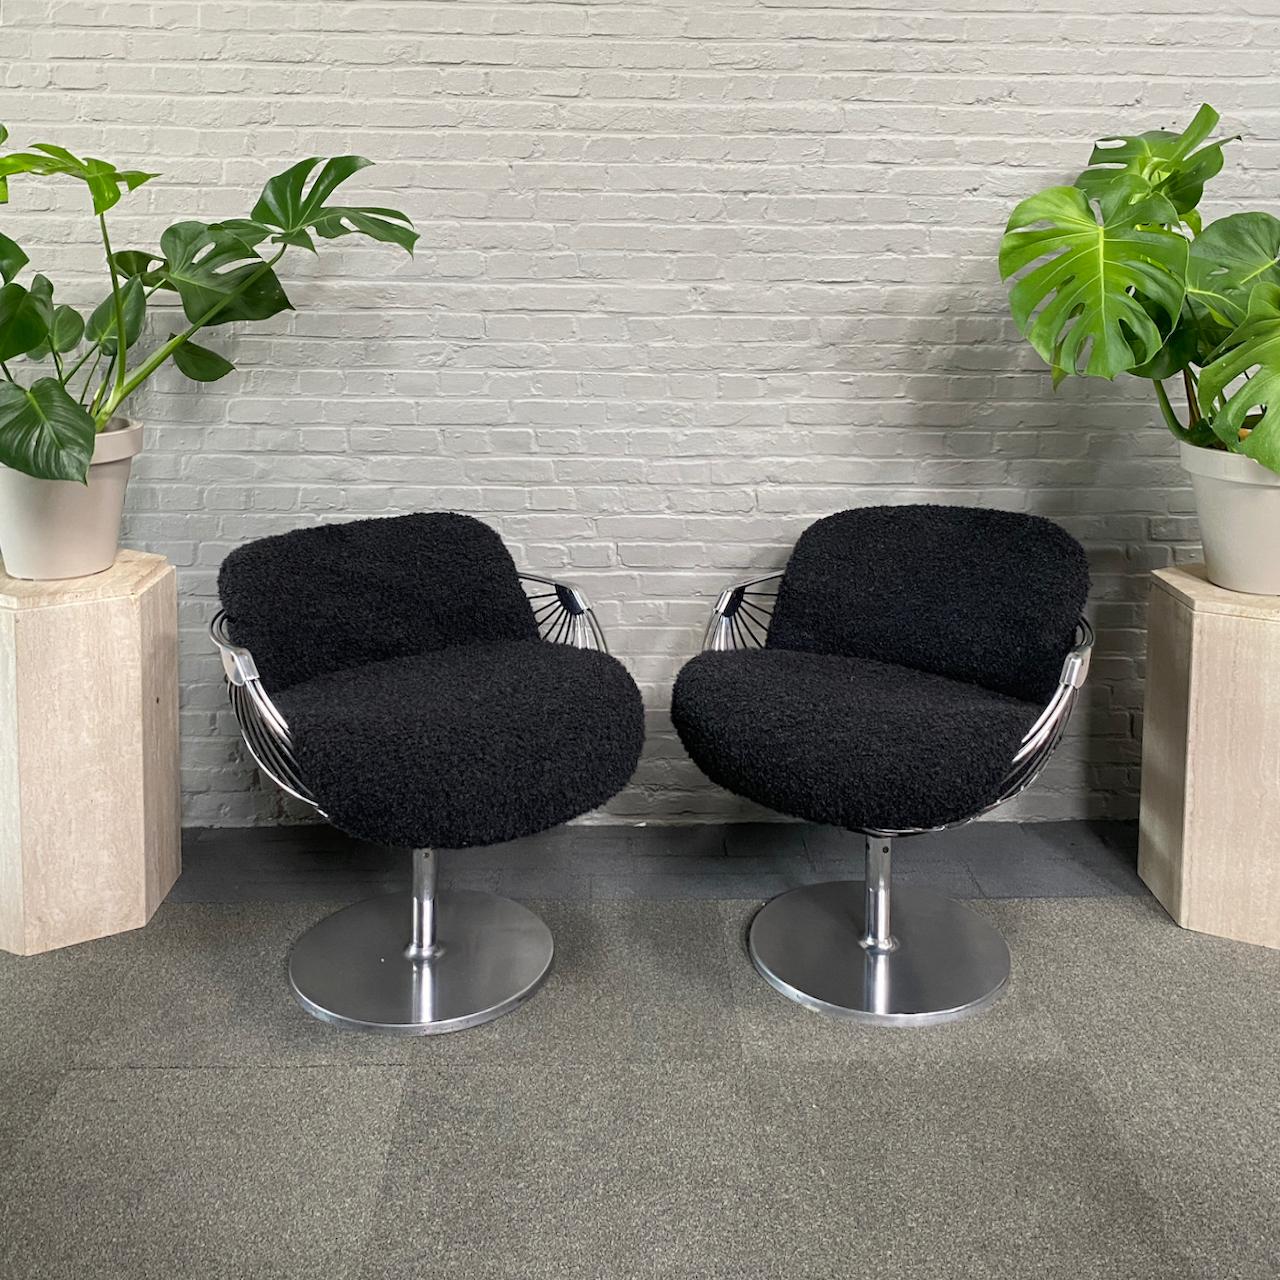 Amazing & Elegant lounge Set.
Designed by de Belgium industrial designer Rudi Verelst for Novalux.

The 2 swivel lounge chairs have a very distinct and iconic chromed wire-frame shell structure which are still in exceptional condition especially